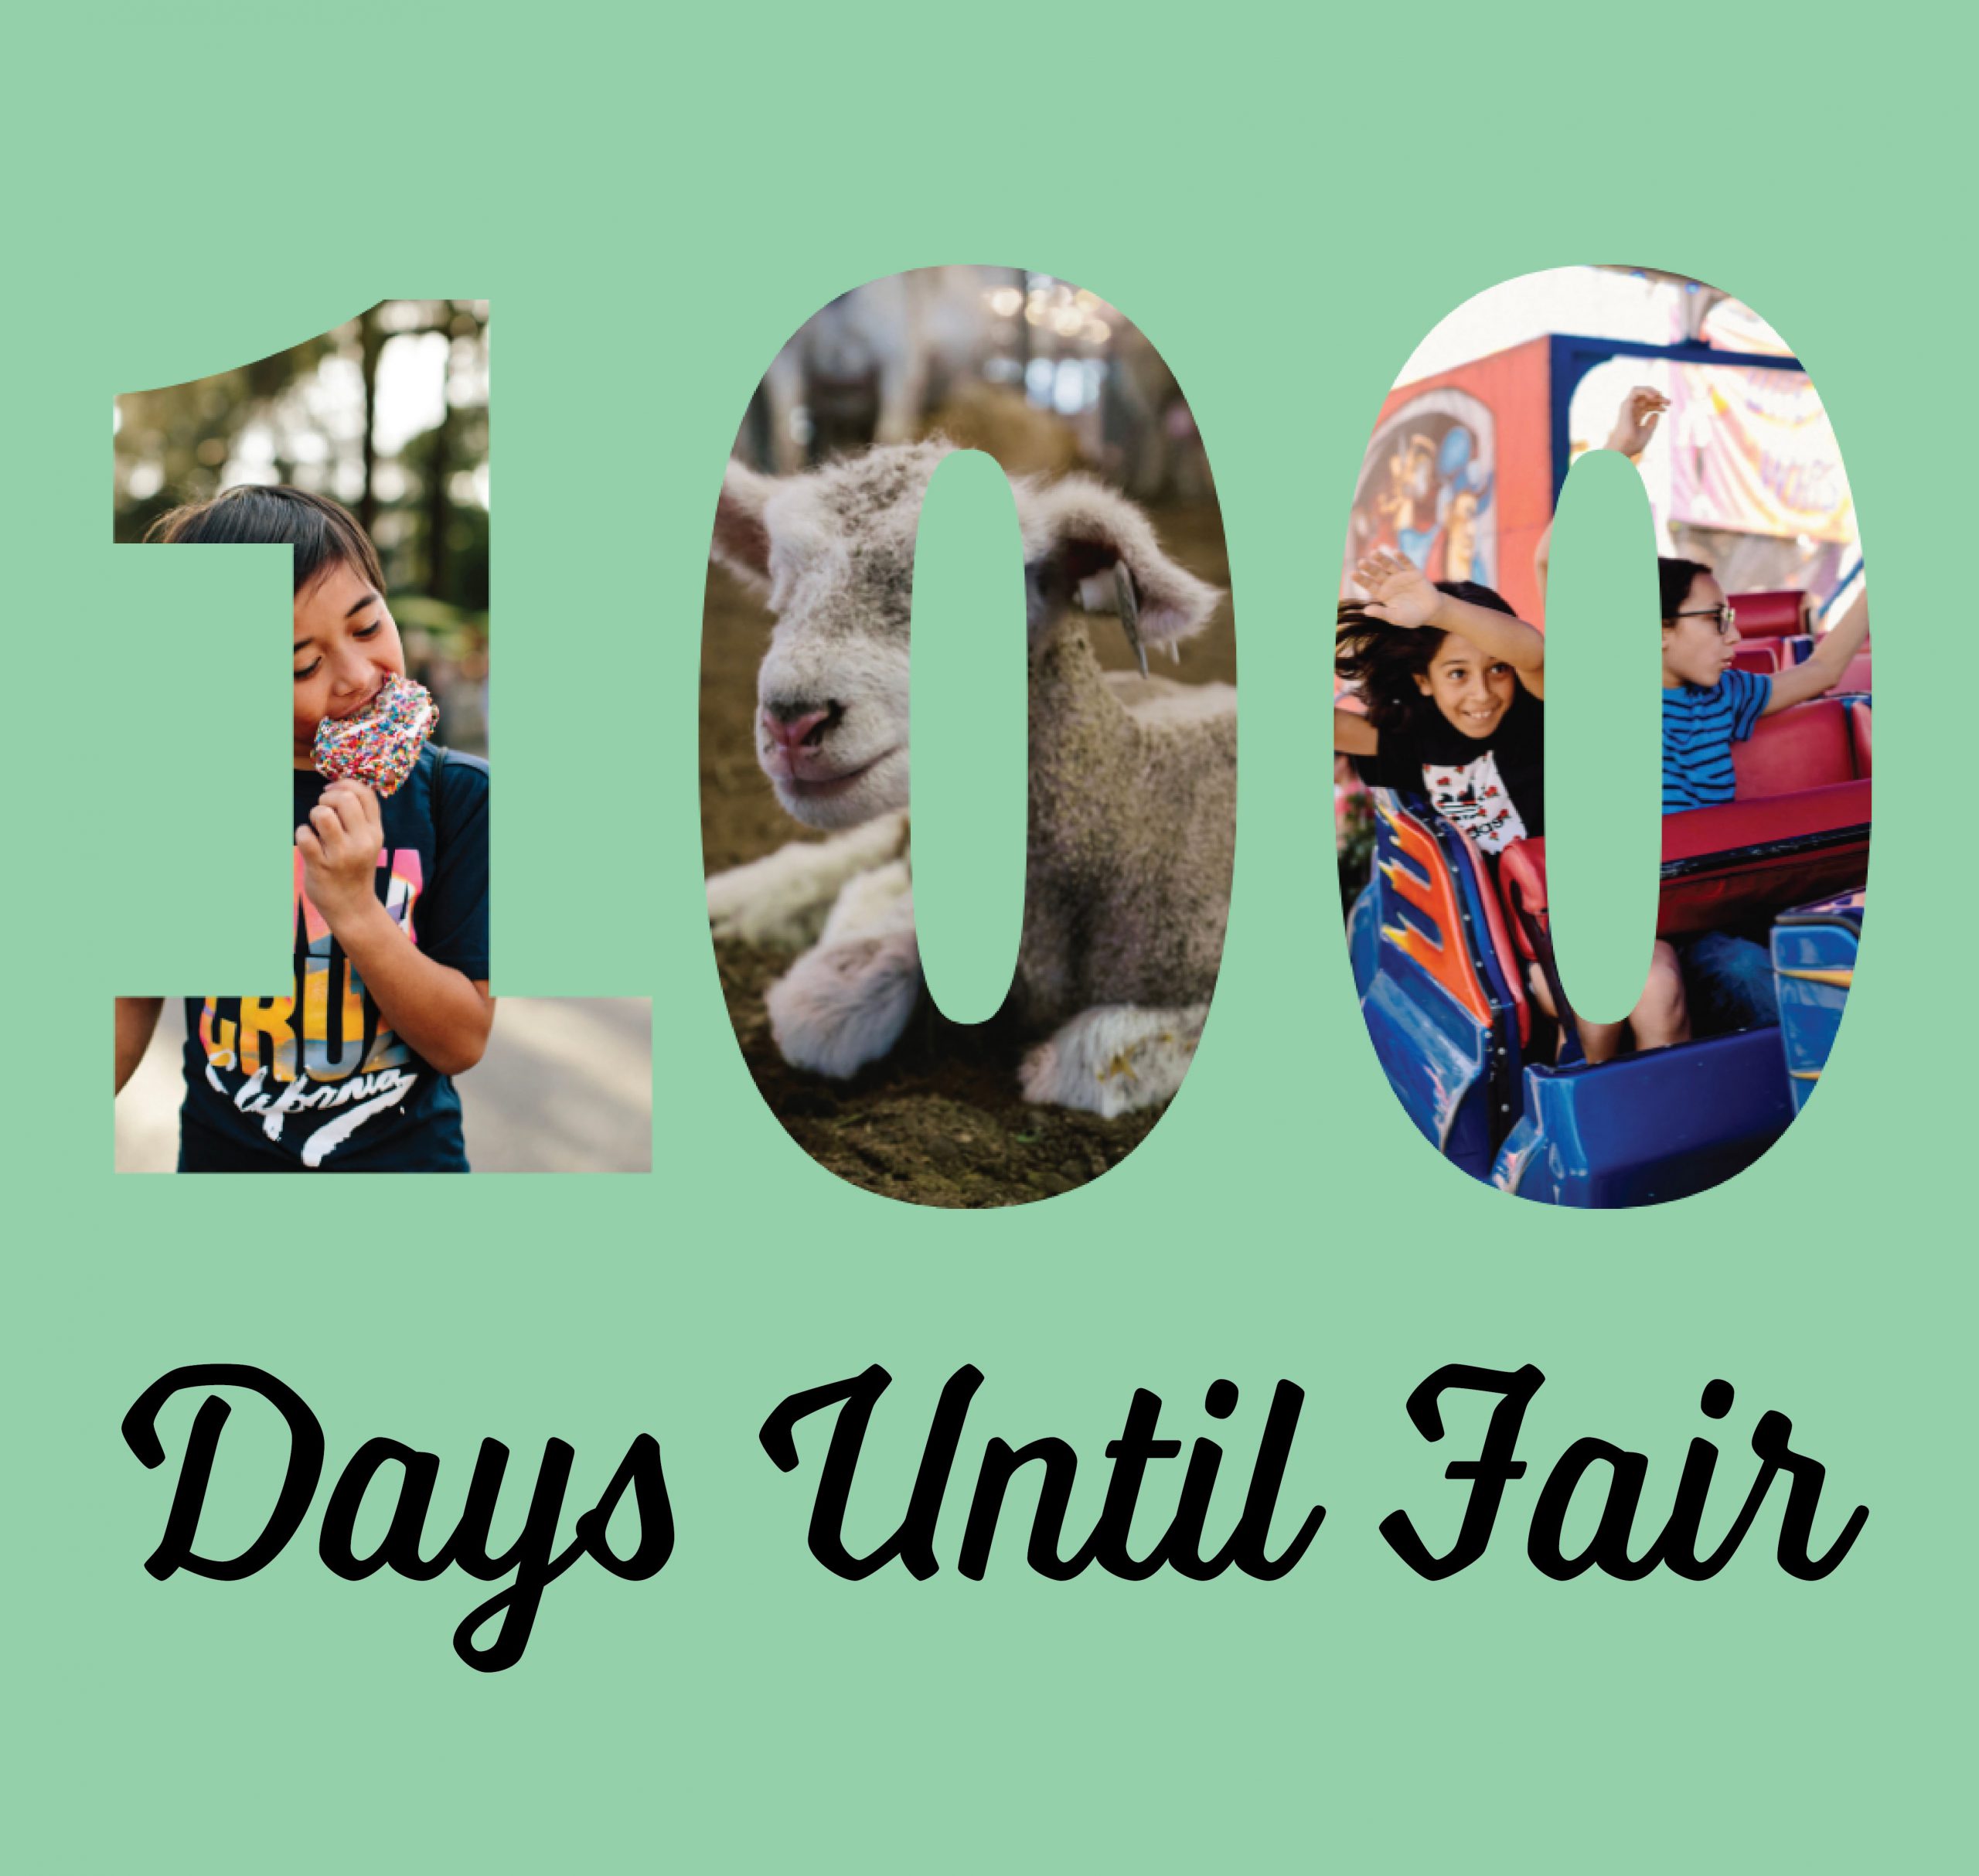 100 DAYS UNTIL THE 100TH ANNIVERSARY OF THE LA COUNTY FAIR! (Tickets on Sale Now)